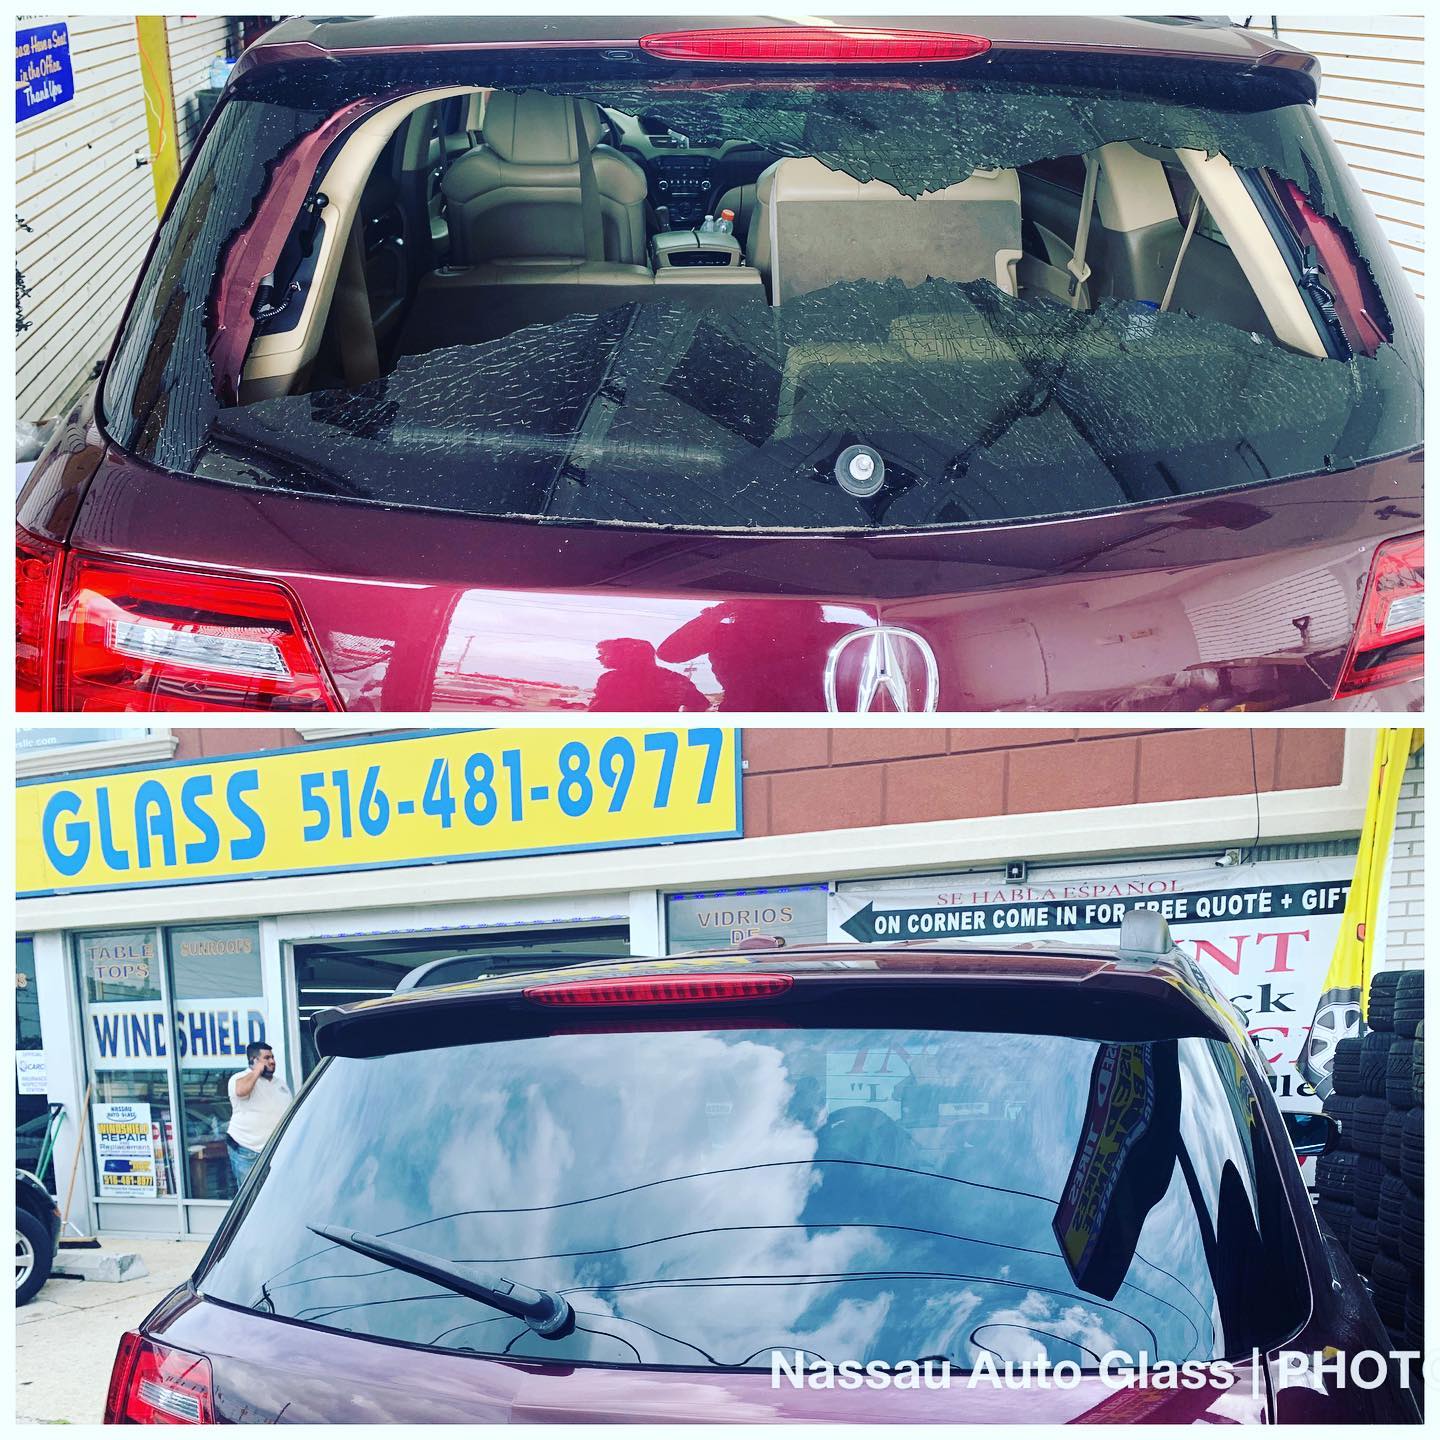 Nassau Auto Glass Services: Before & After Picture 15